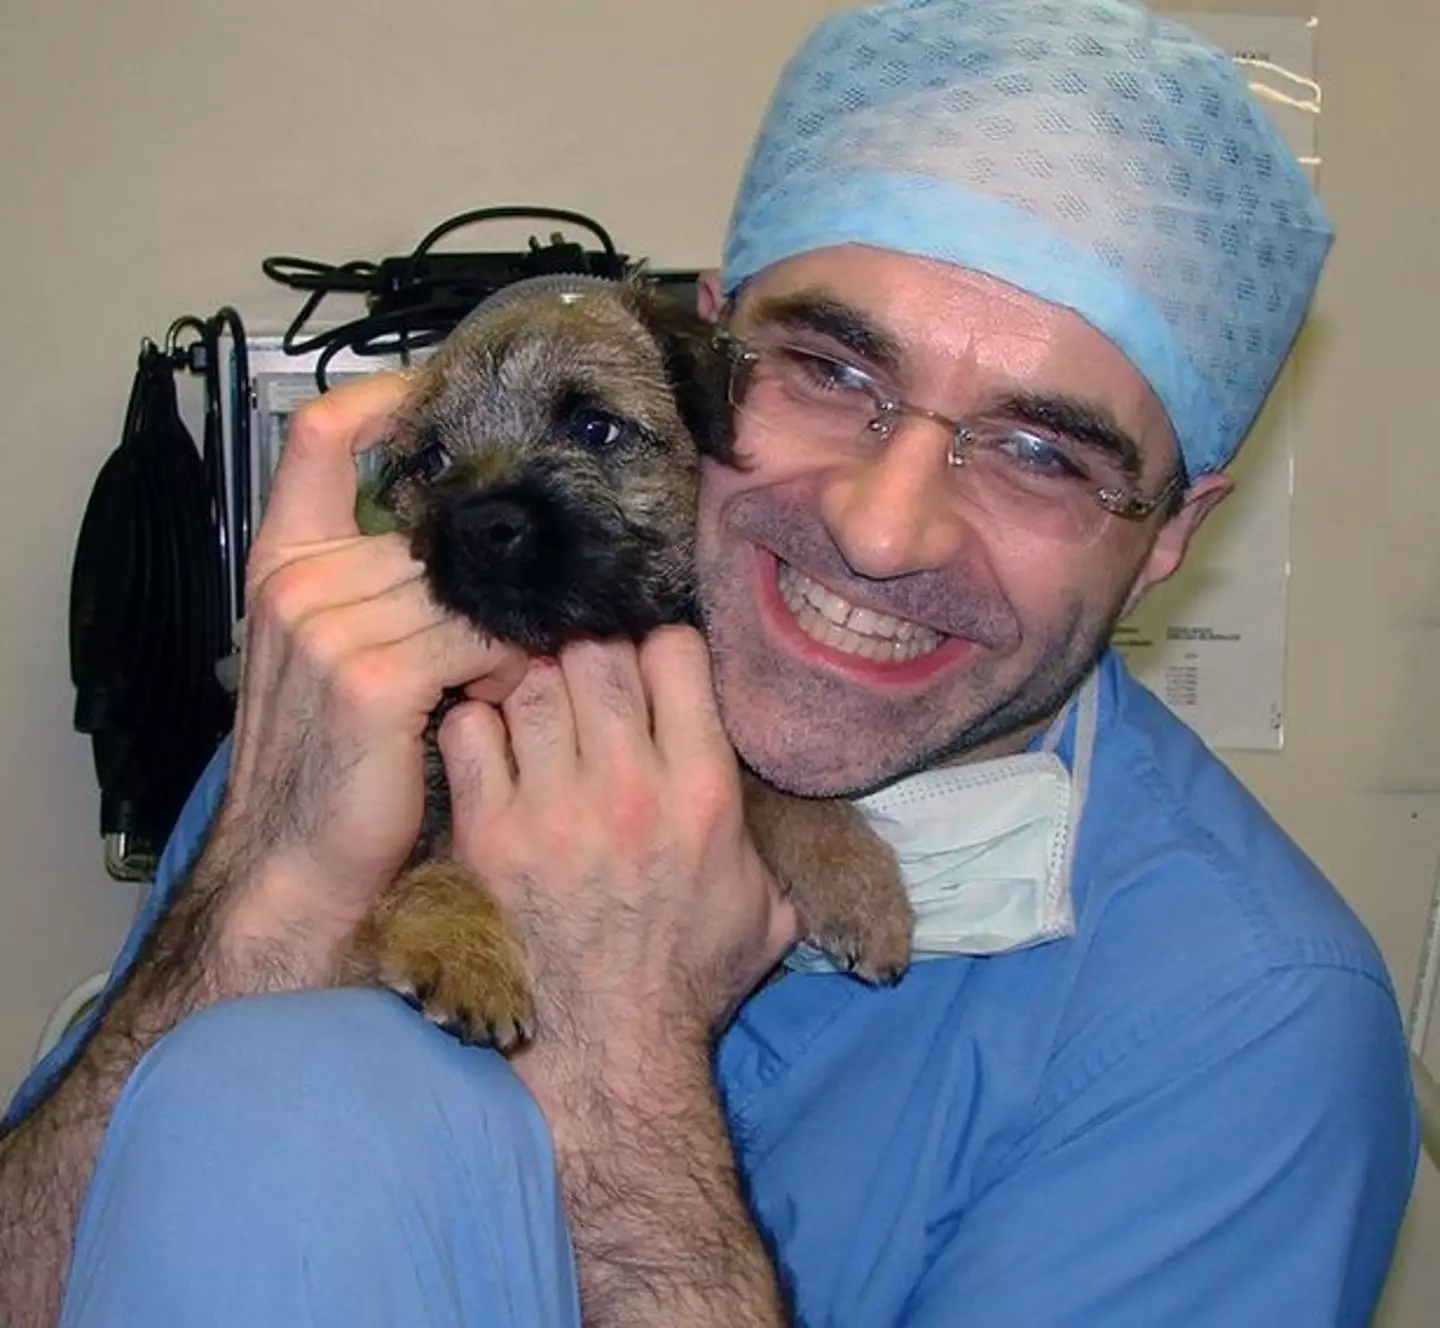 The Supervet was the inspiration behind 'Toxic'.